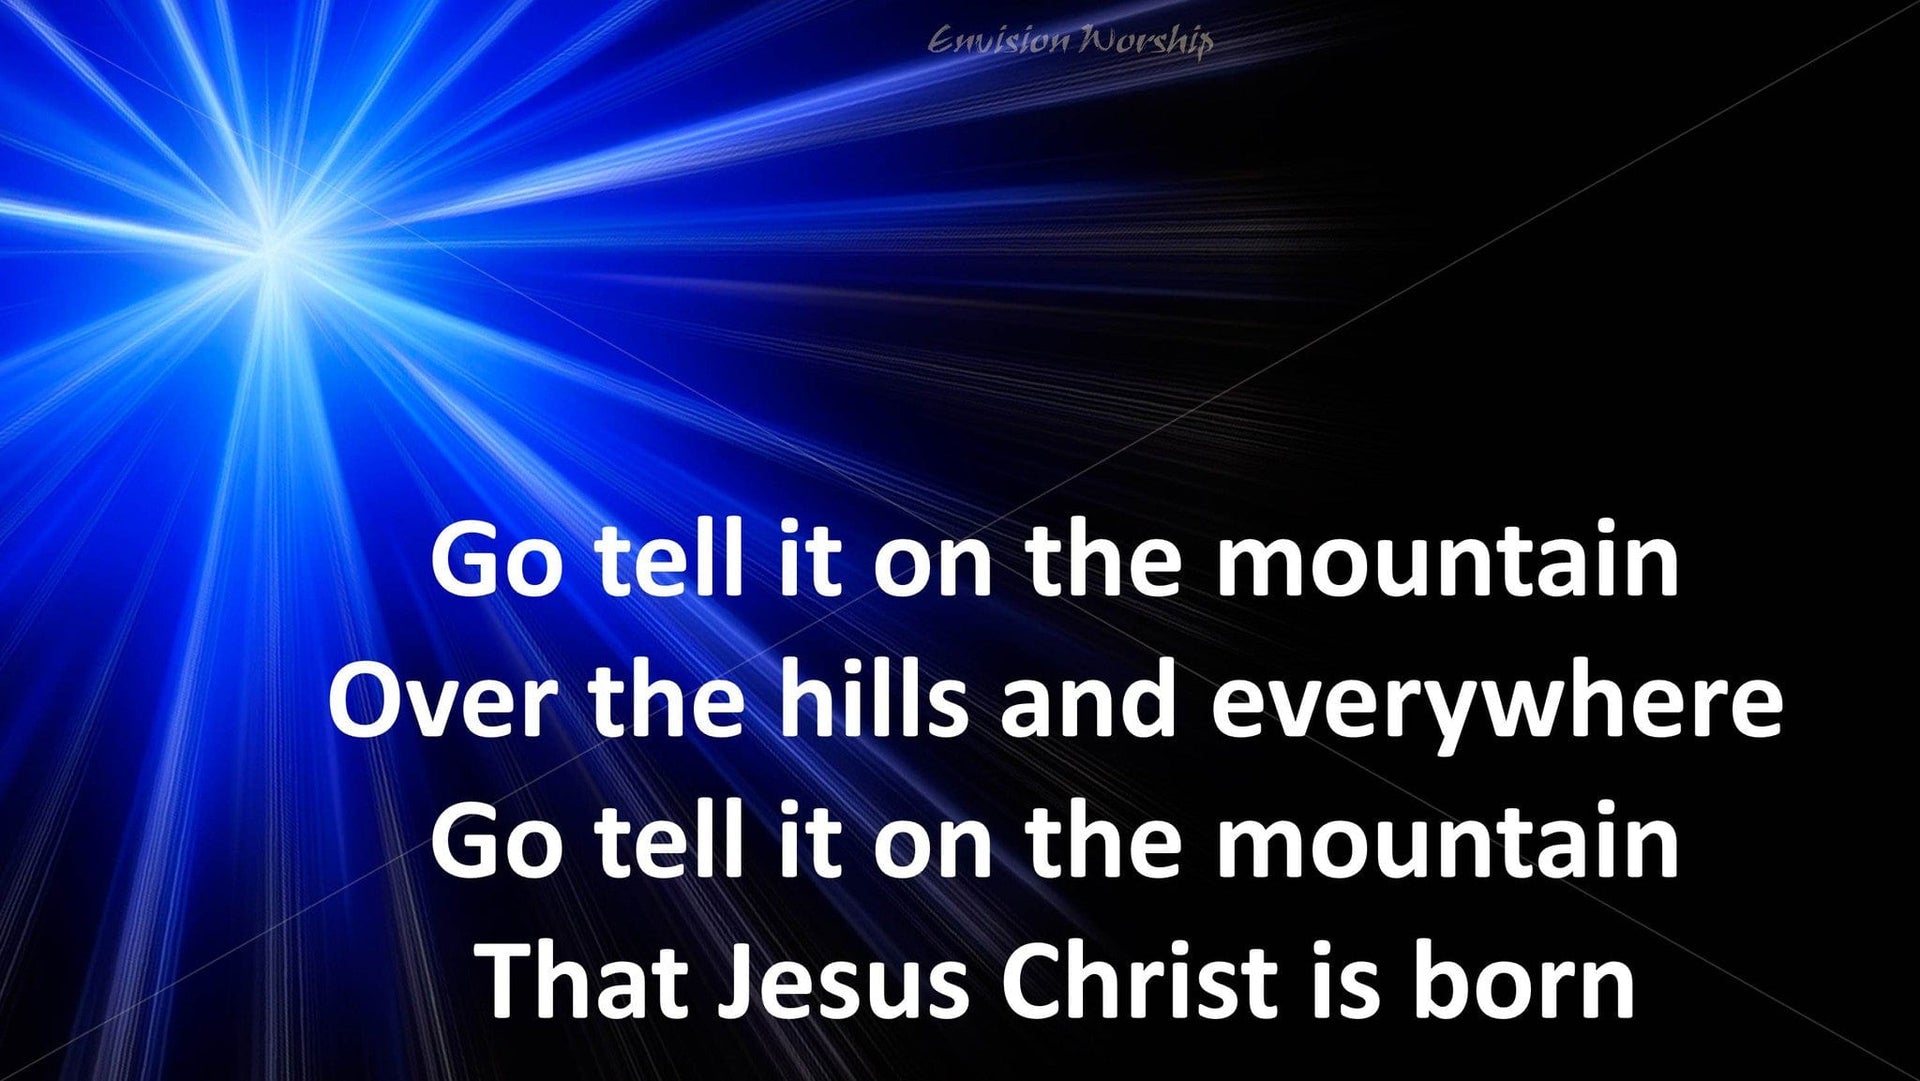 Go tell it on the mountain church PowerPoint with star.